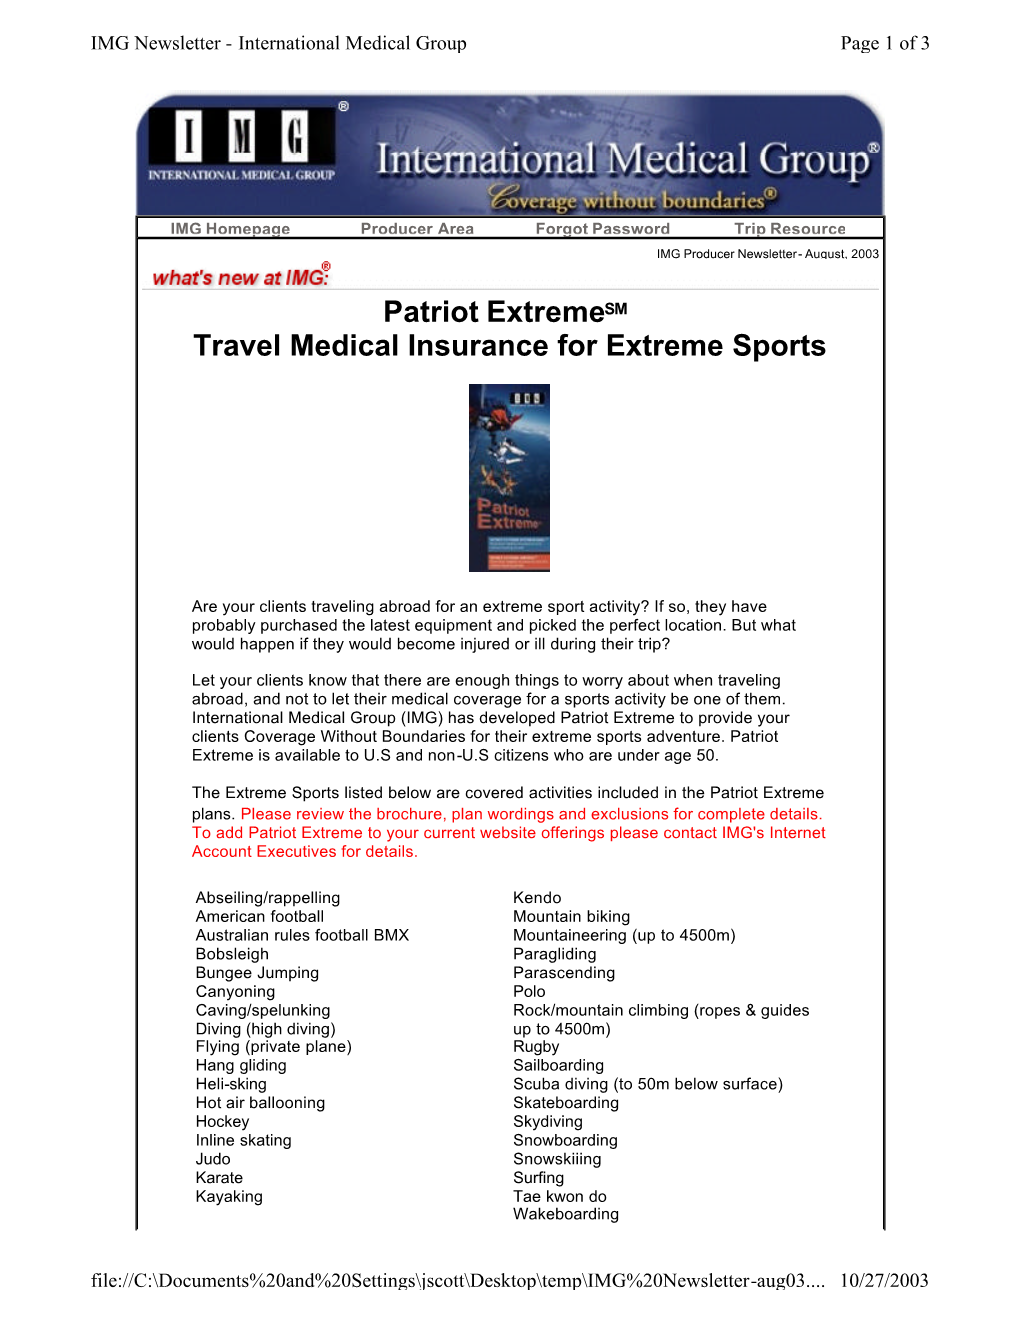 Patriot Extremesm Travel Medical Insurance for Extreme Sports